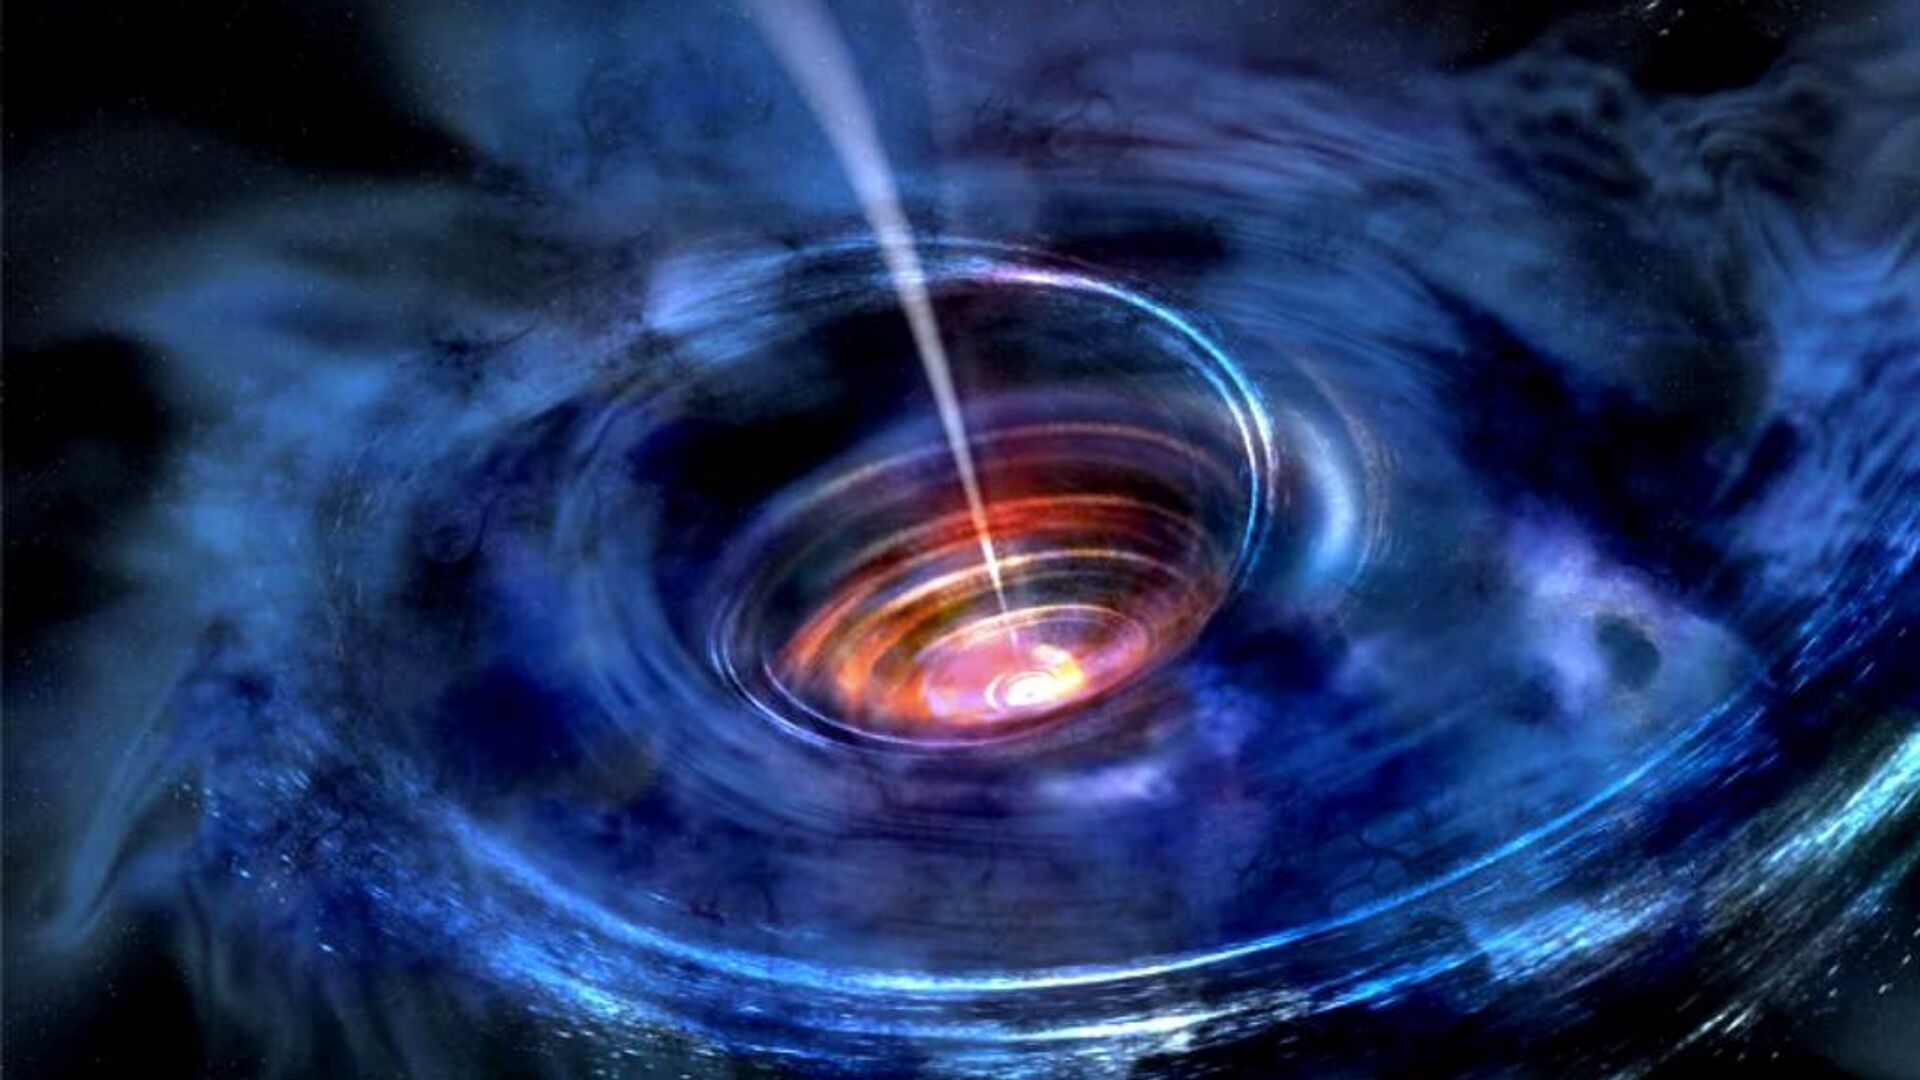 In this artist's rendering, a thick accretion disk has formed around a supermassive black hole following the tidal disruption of a star that wandered too close.  - Sputnik International, 1920, 11.03.2021